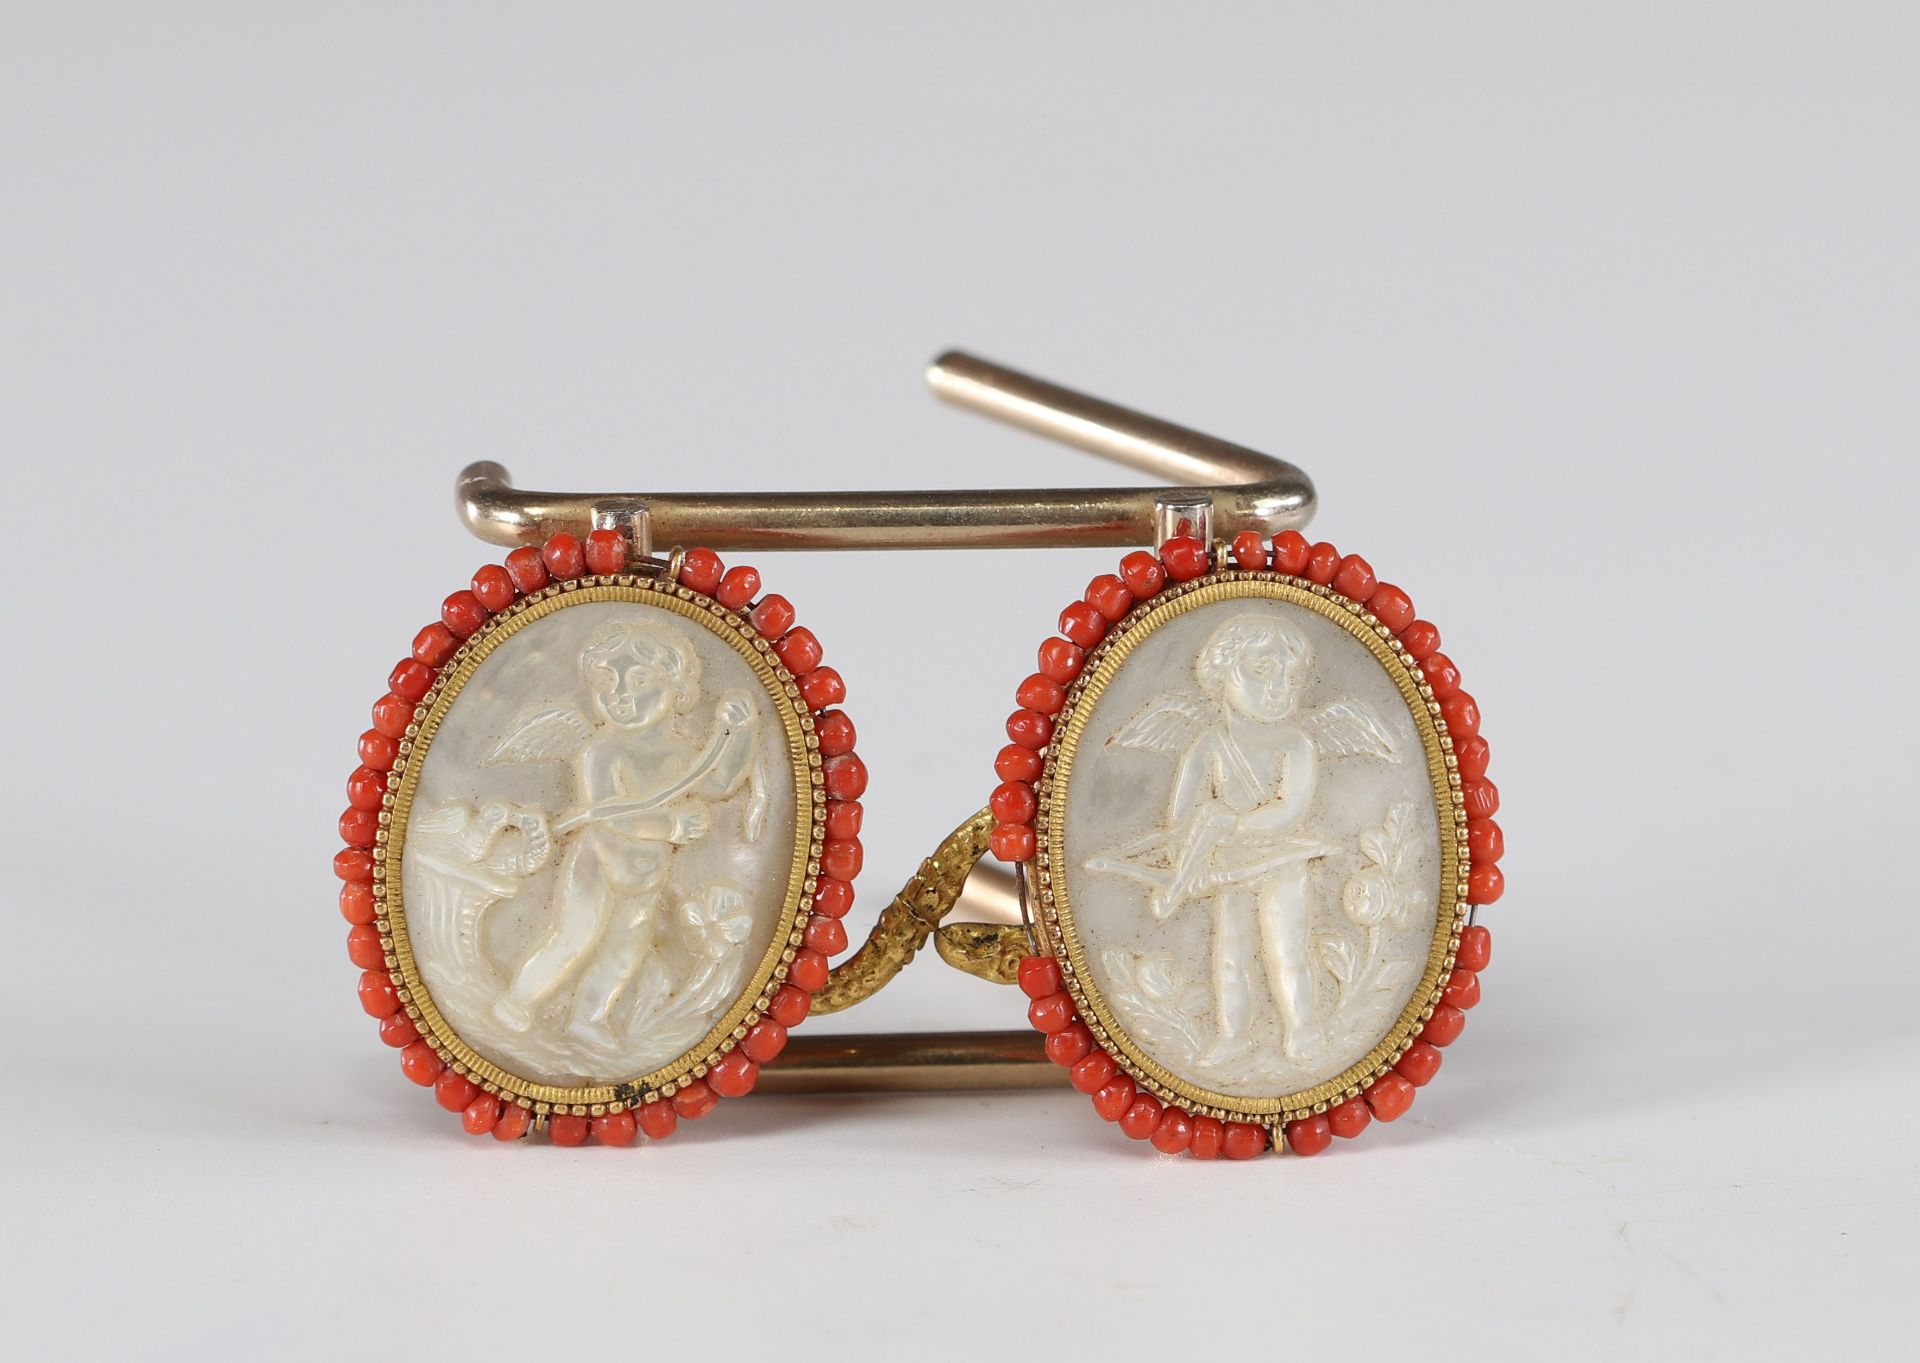 Rare Louis XV mother-of-pearl and coral buttons "engraved with cherubs".